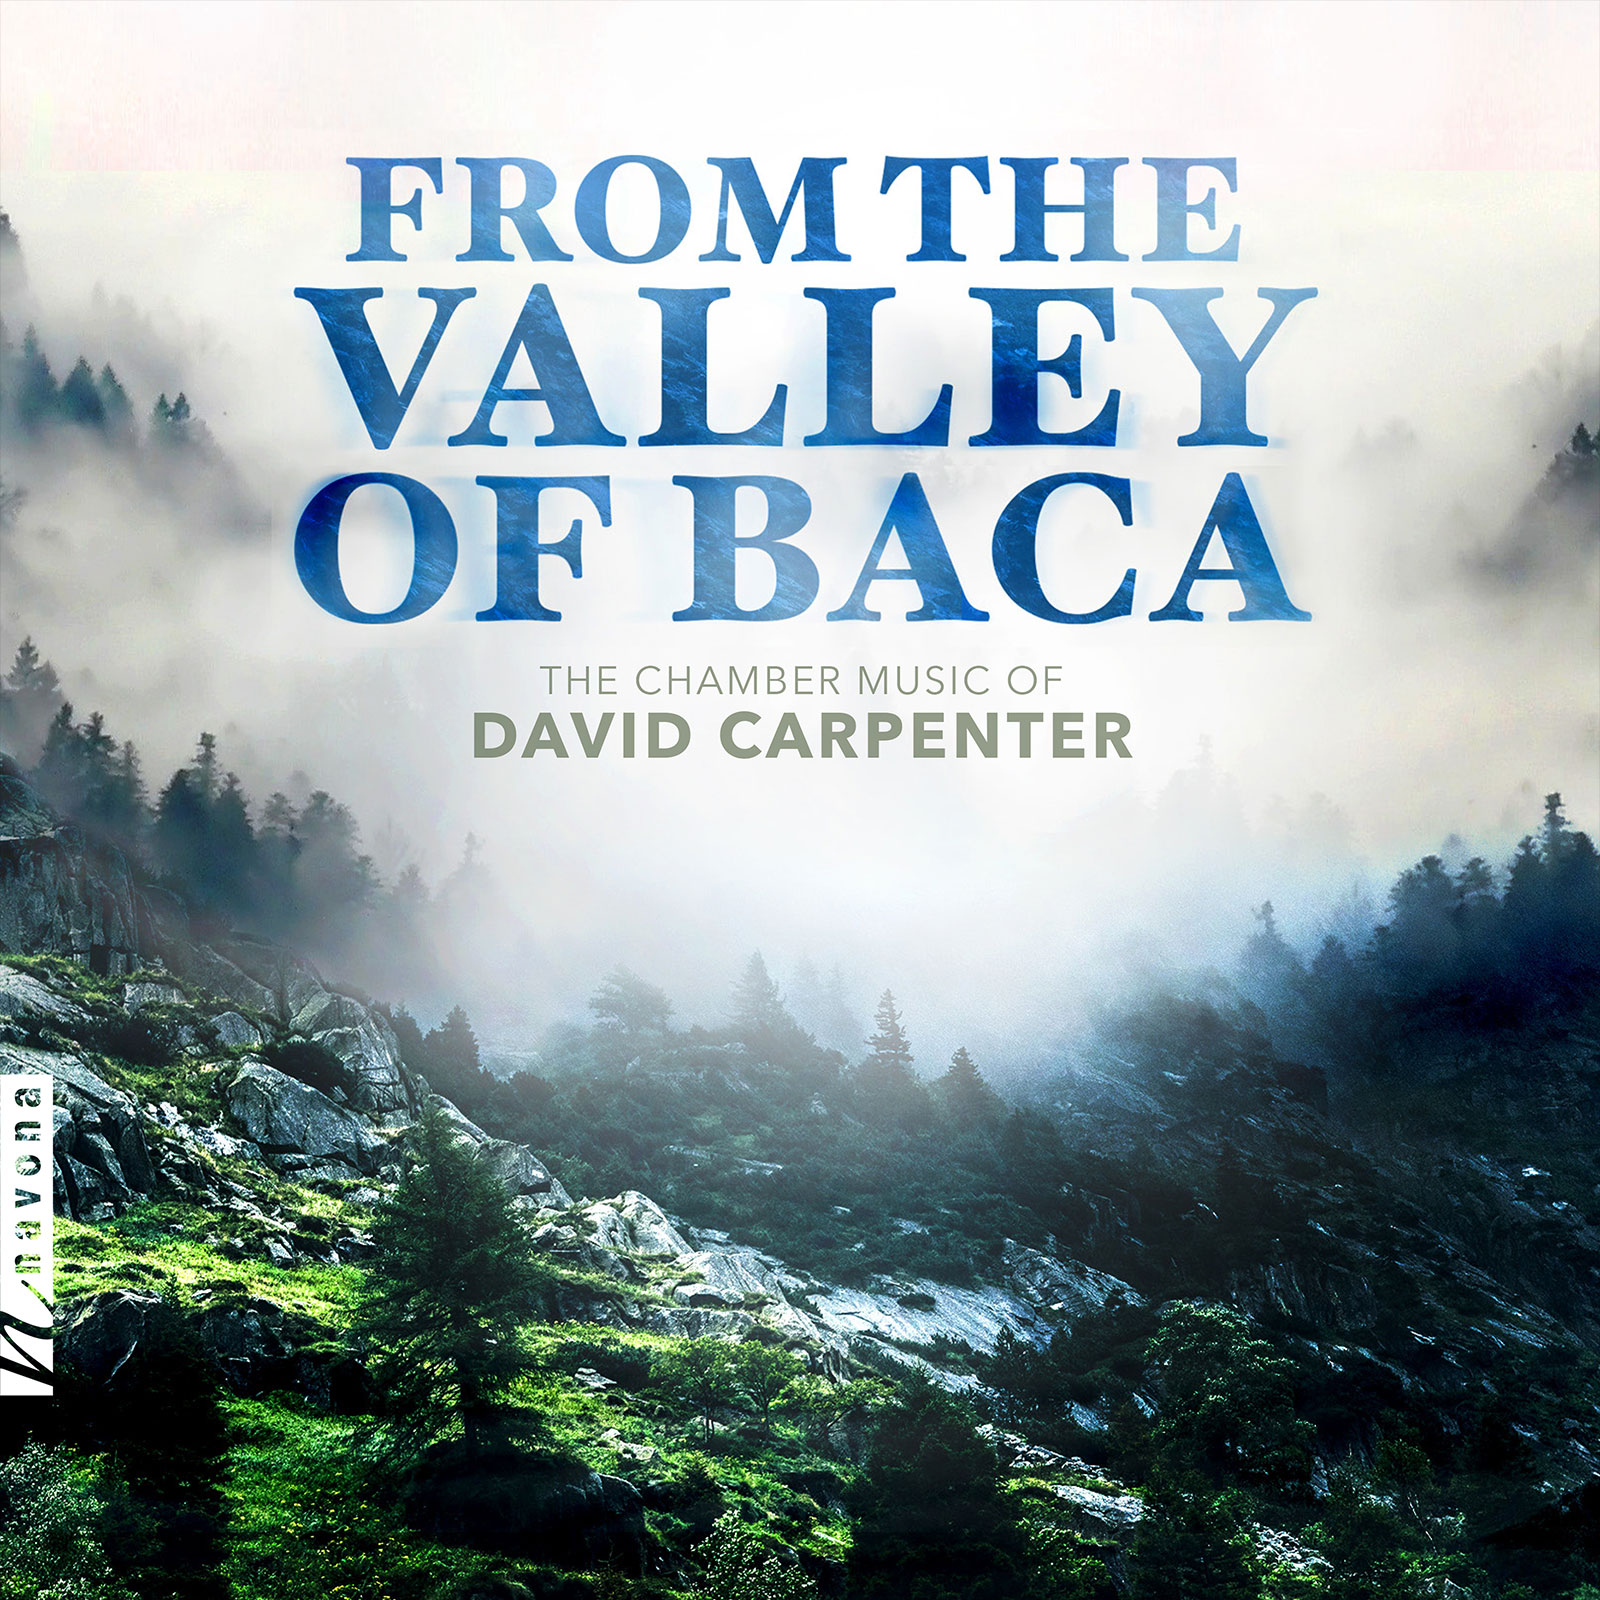 From the Valley of Baca